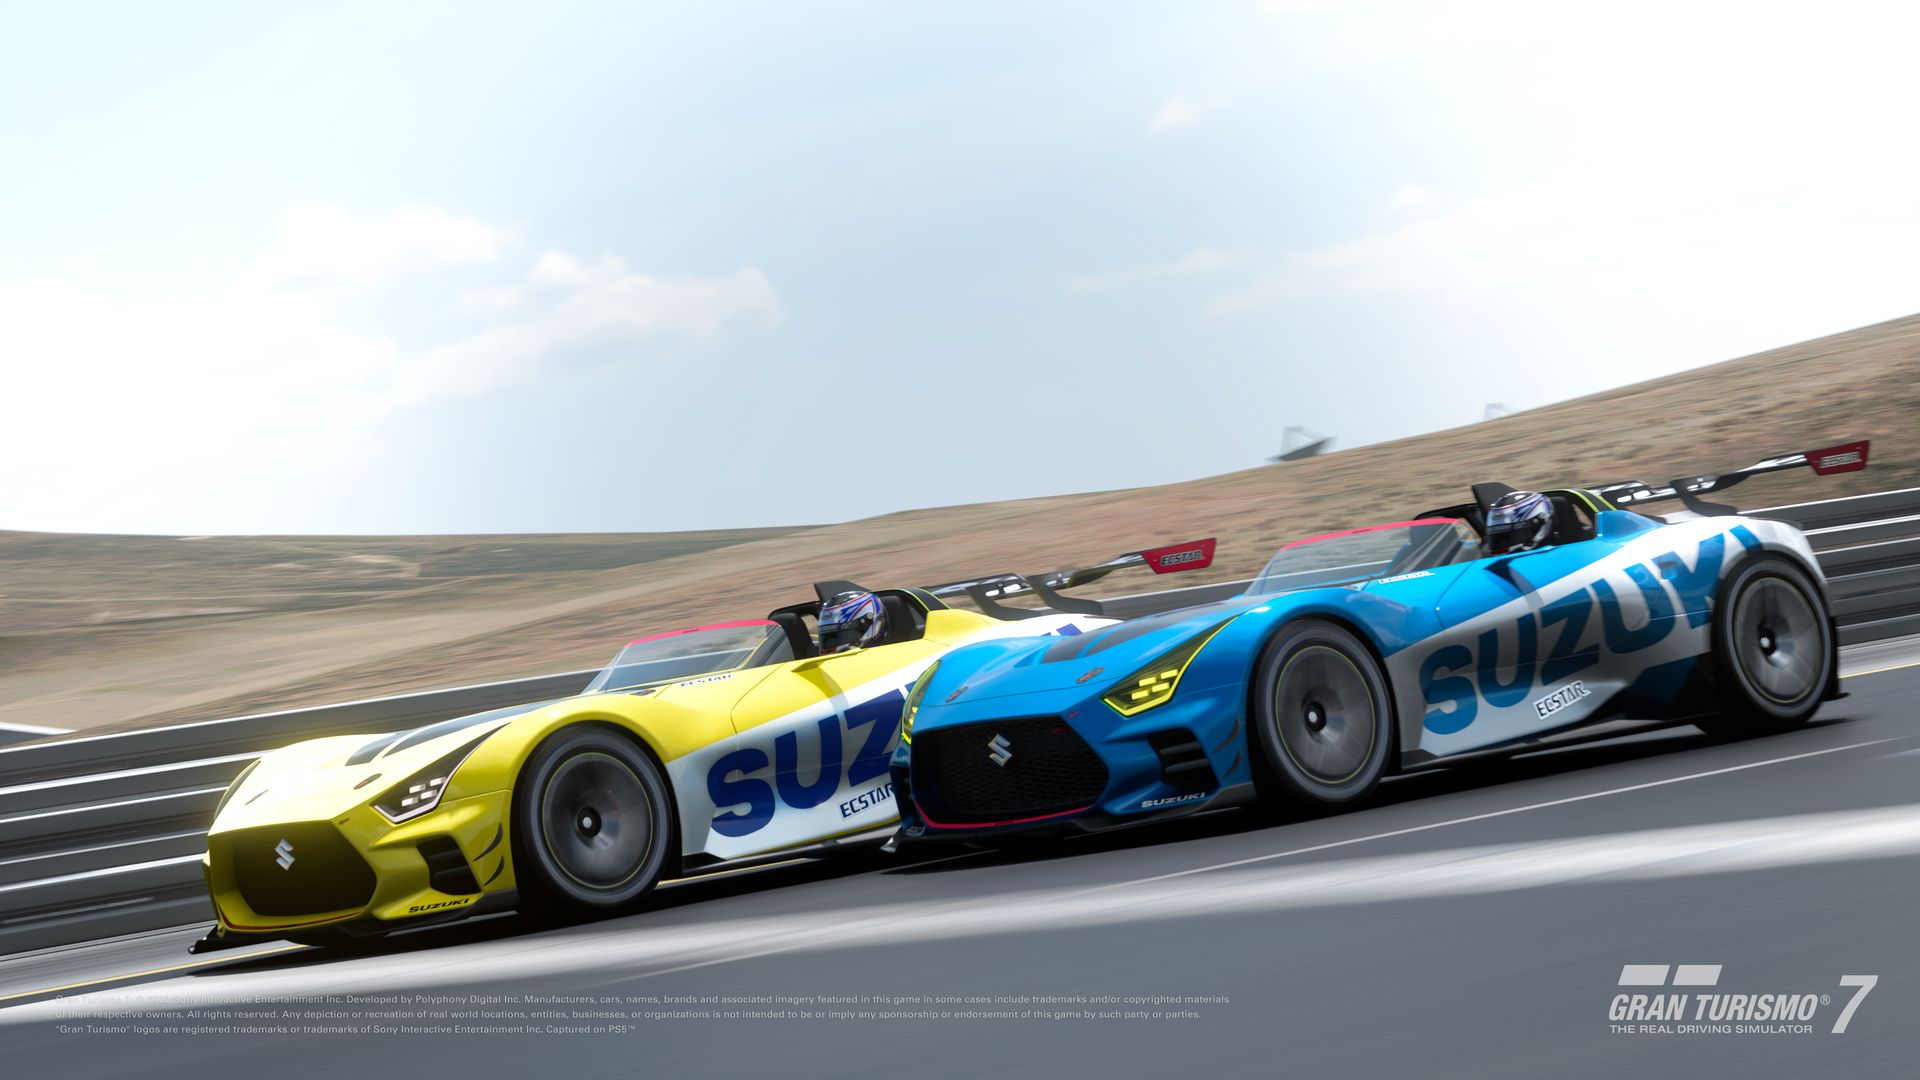 The Gran Turismo 7 May Update: Three New Cars and More Tuning